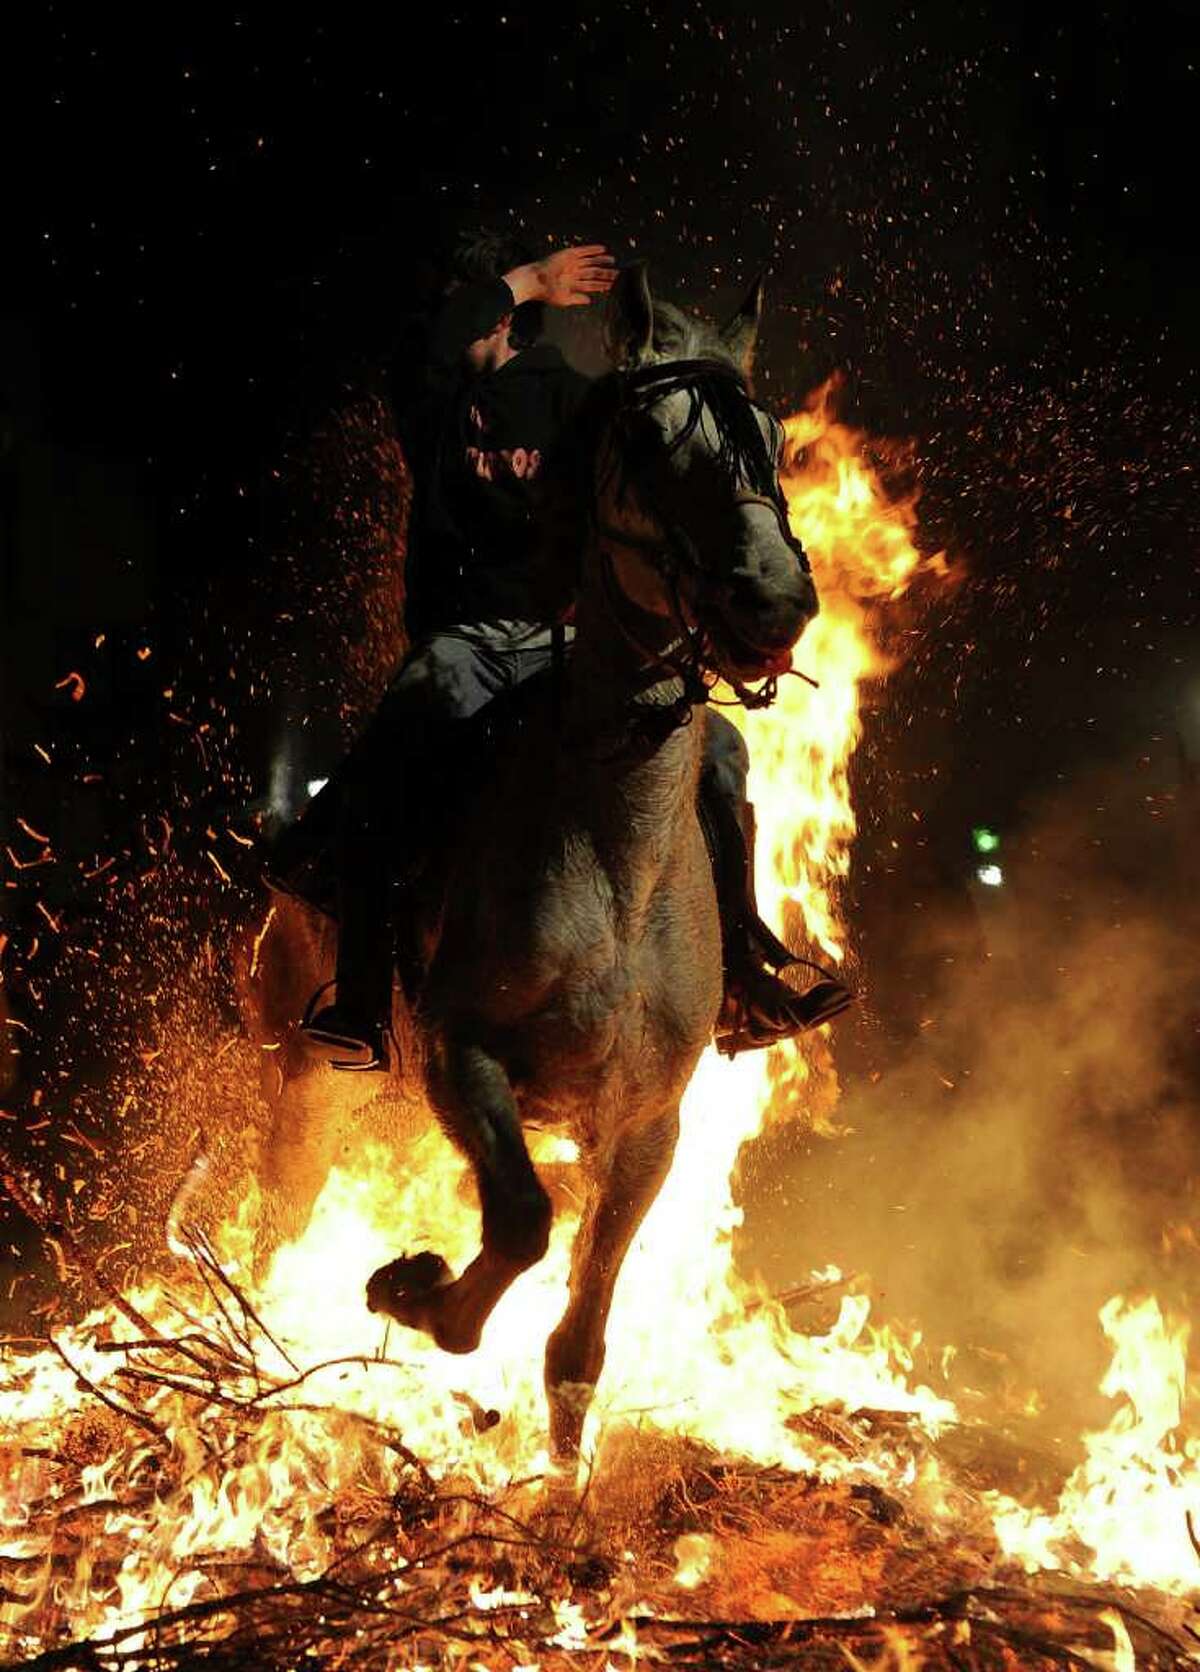 SAN BARTOLOME DE PINARES, SPAIN - JANUARY 16: A boy covers his face from the flames as he rides a horse through a bonfire on January 16, 2011 in the small village of San Bartolome de Pinares, Spain. In honor of San Anton, the patron saint of animals, horses are riden through the bonfires on the night before the official day of honoring animals in Spain. (Photo by Jasper Juinen/Getty Images)